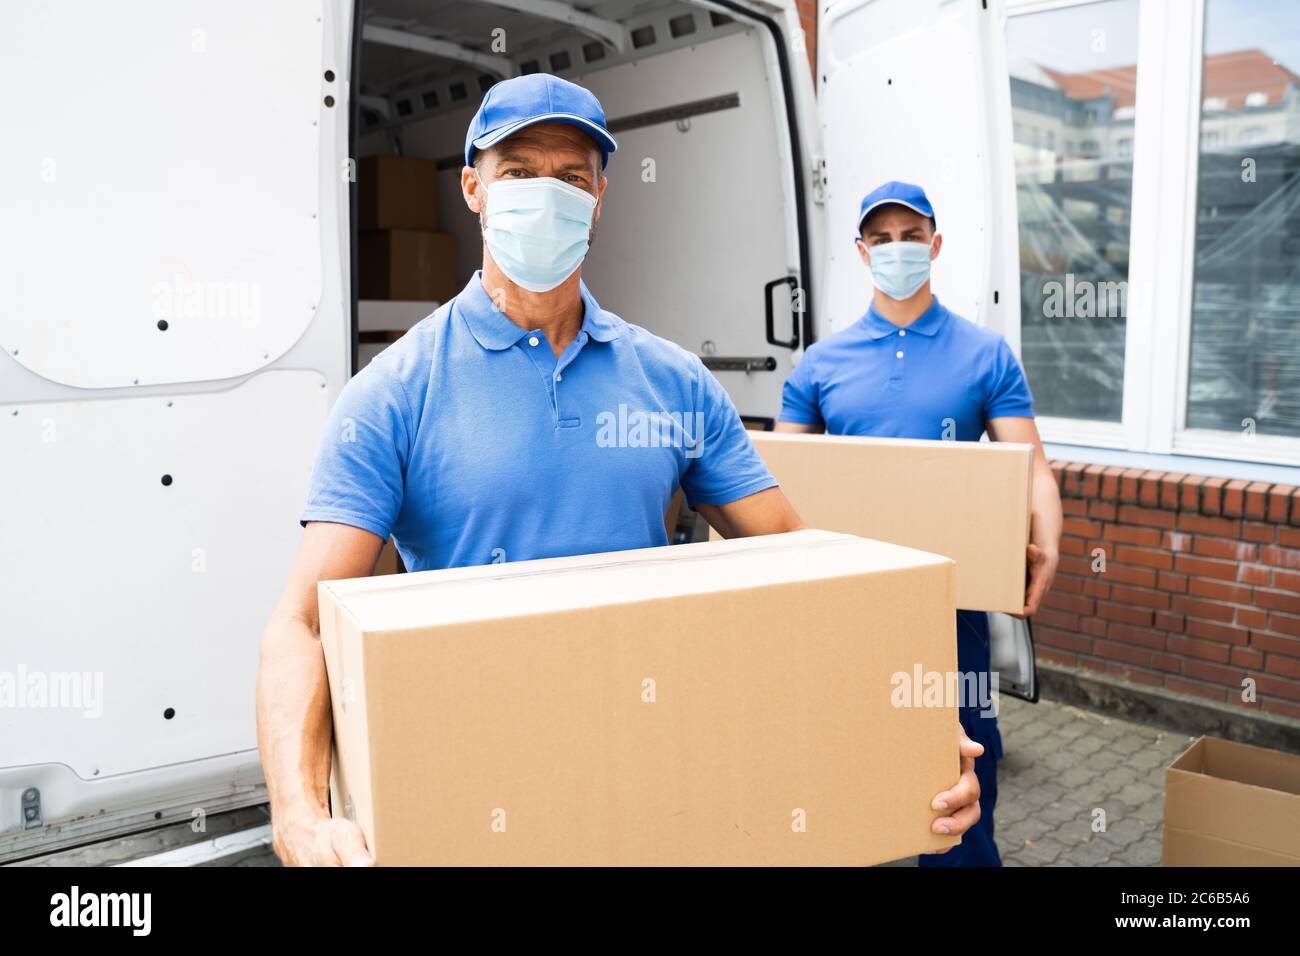 Blue Delivery Men Unloading Package From Truck With Face Mask Stock Photo